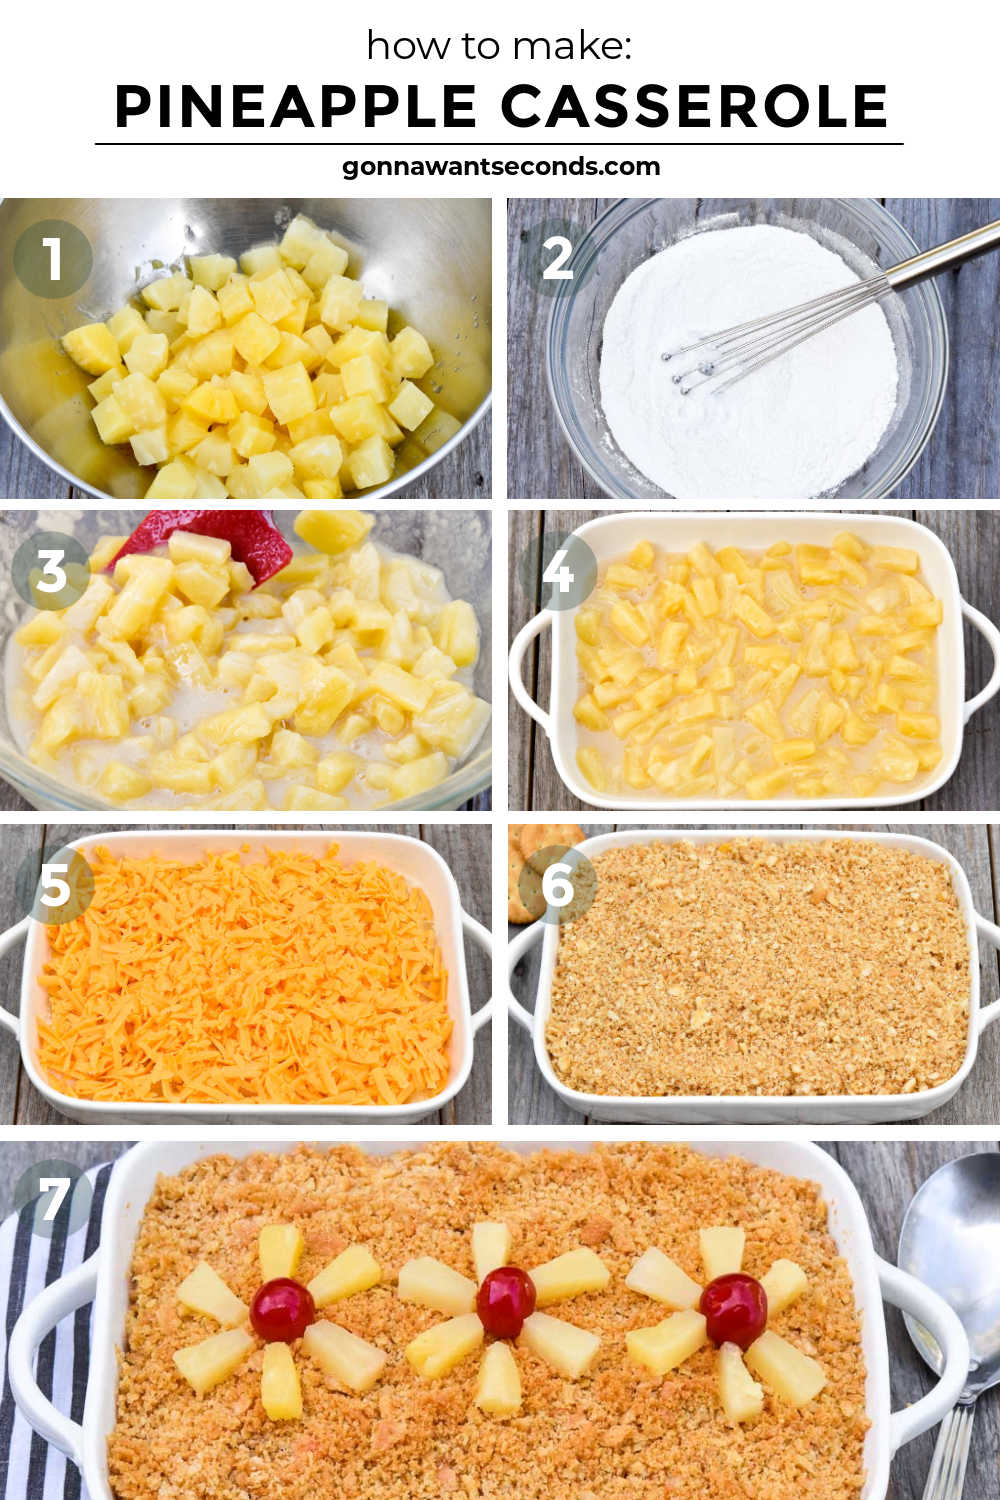 Step by step how to make pineapple casserole